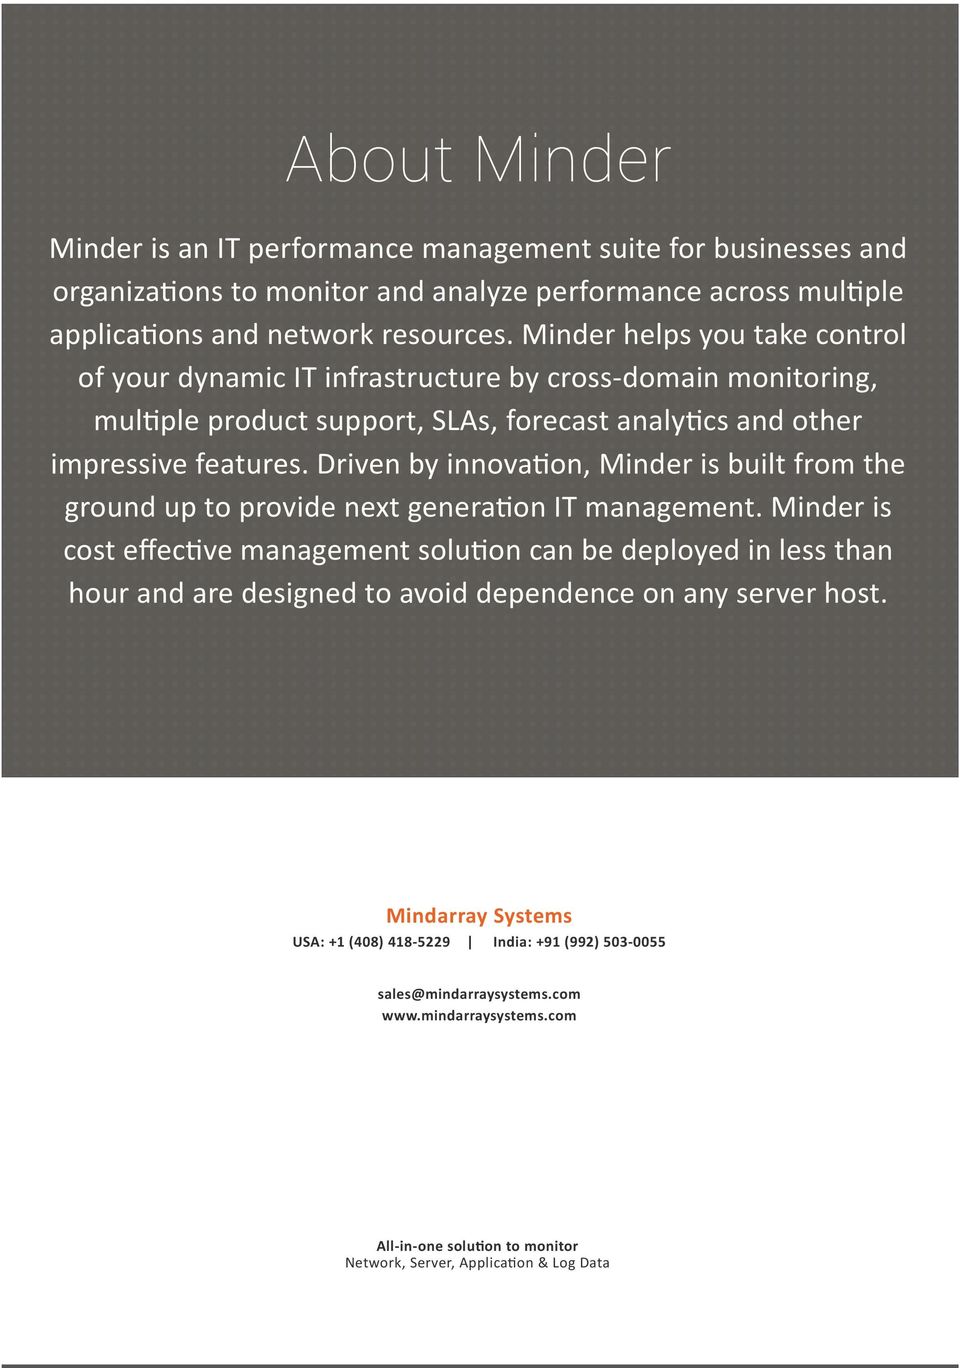 Driven by innovation, Minder is built from the ground up to provide next generation IT management.